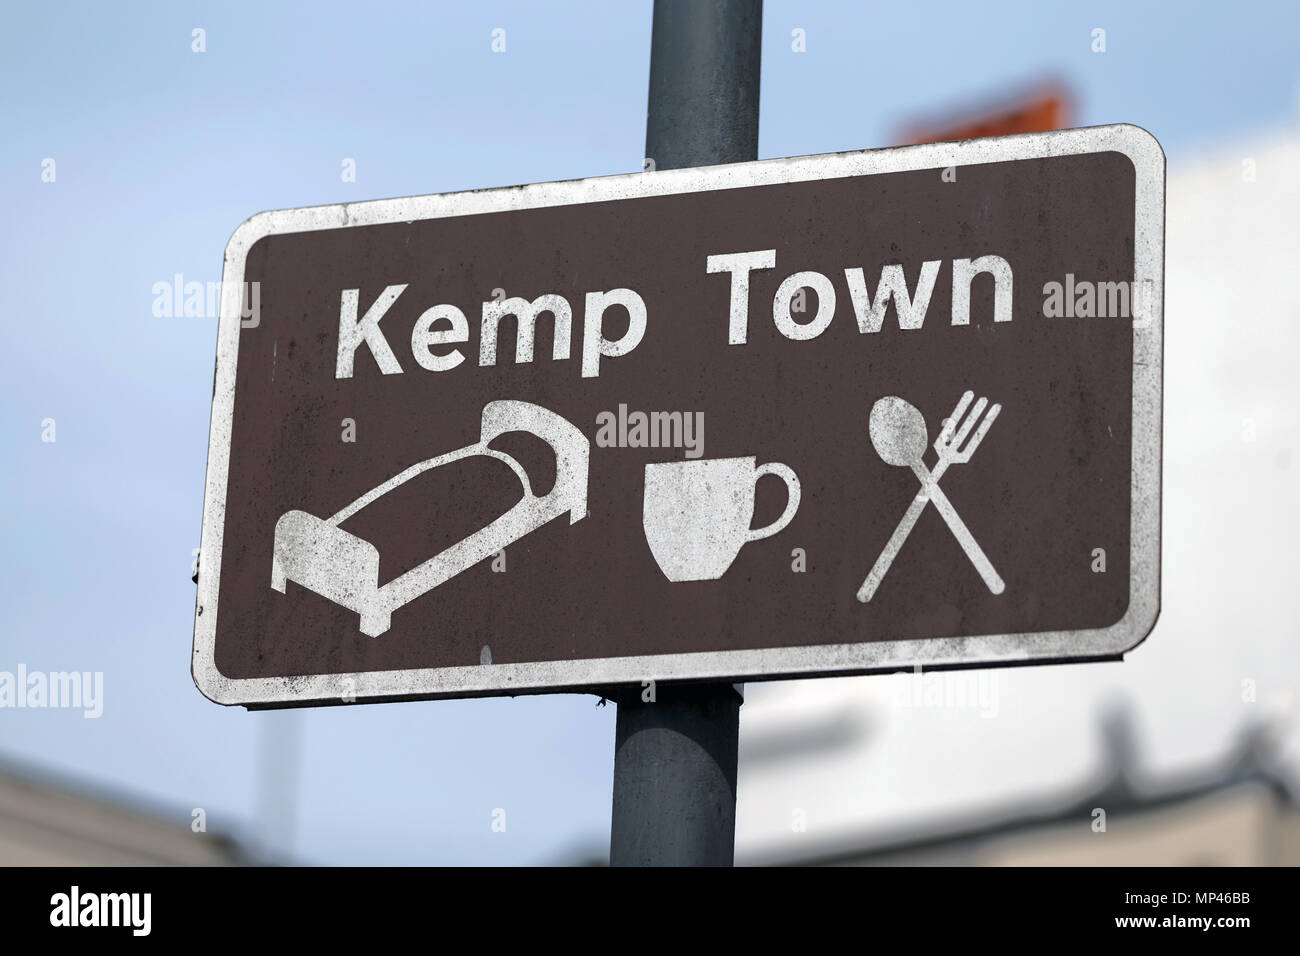 A sign for Kemp Town (Kemptown) in Brighton, East Sussex, UK. Stock Photo